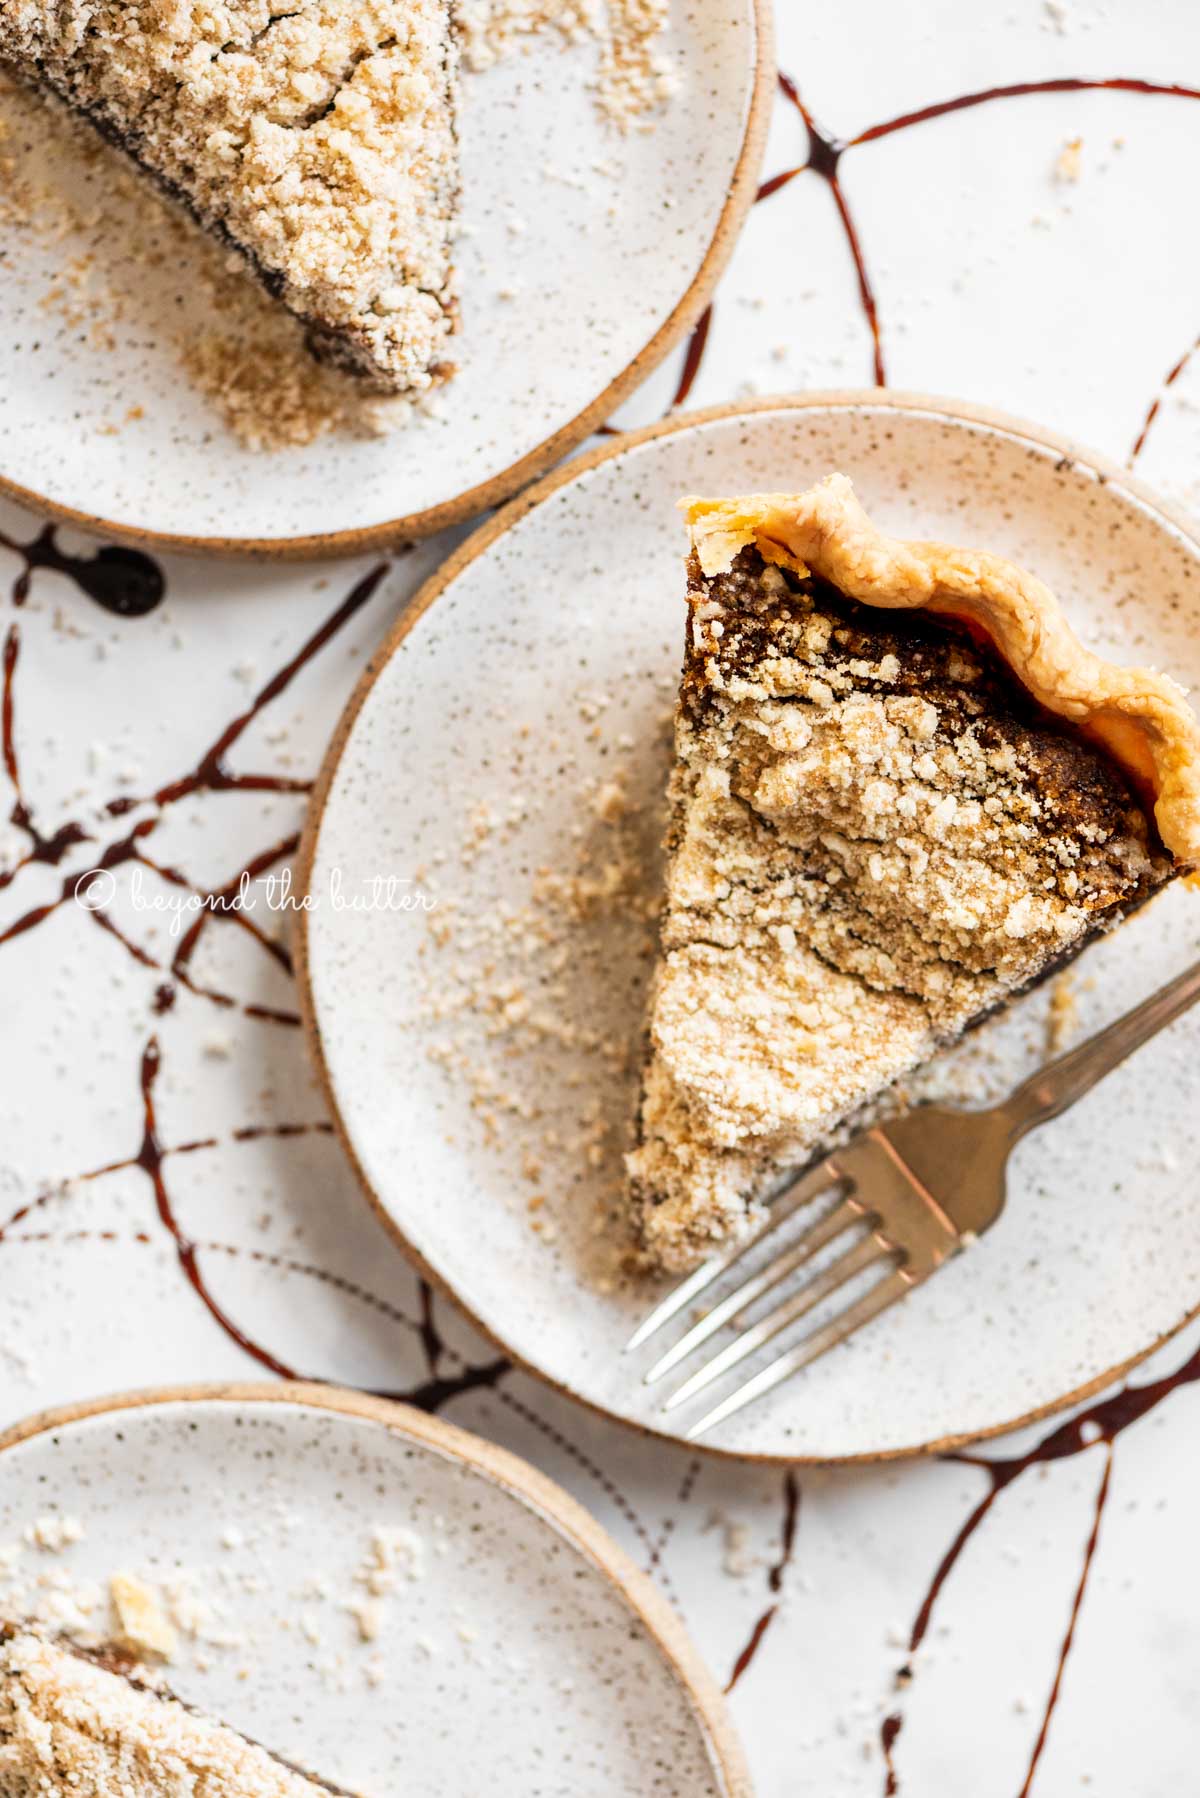 Slices of shoo fly pie on dessert plates | All Images © Beyond the Butter™